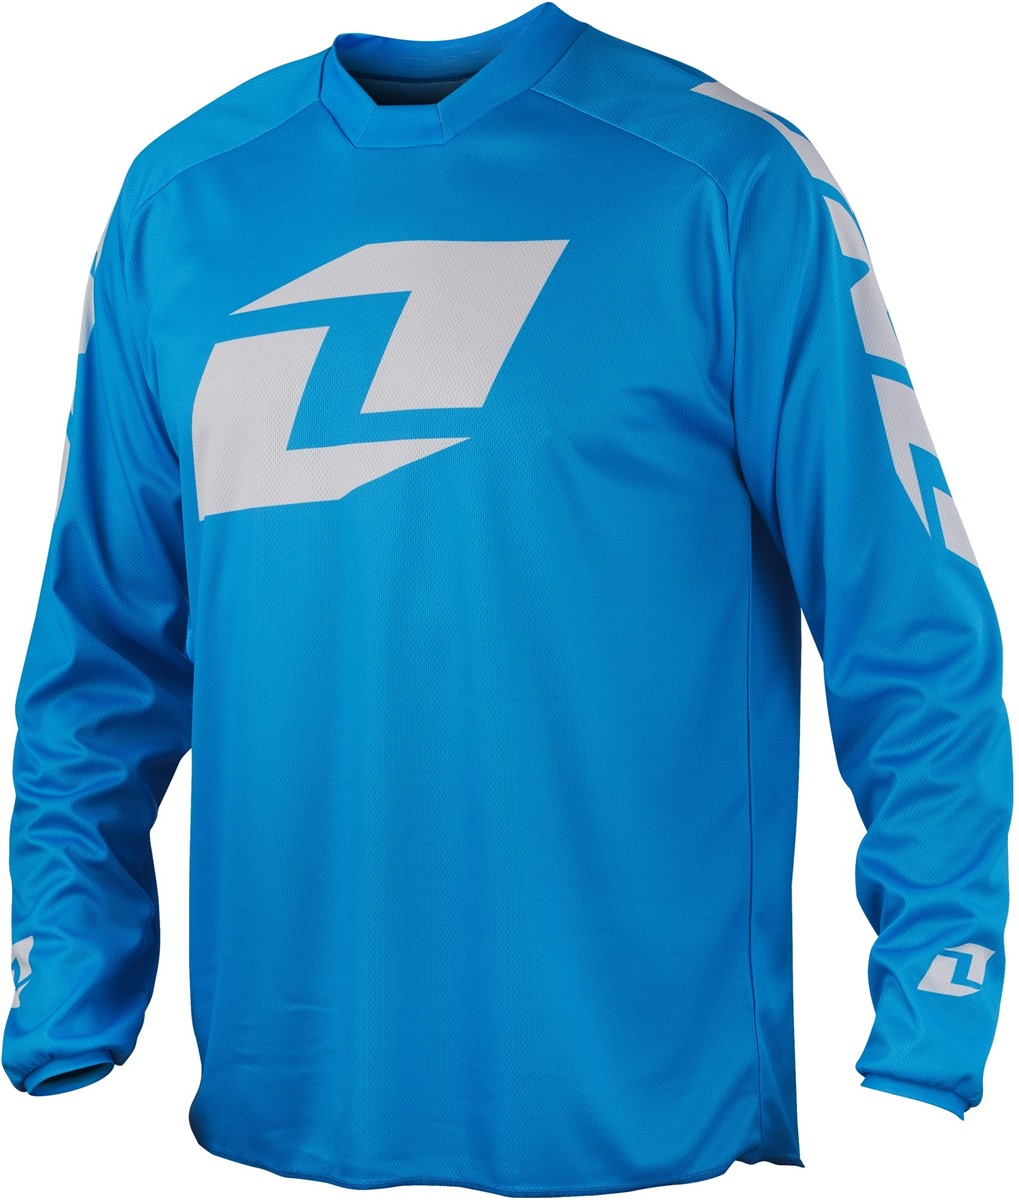 One Industries Atom Icon Long Sleeve Cycling Jersey product image